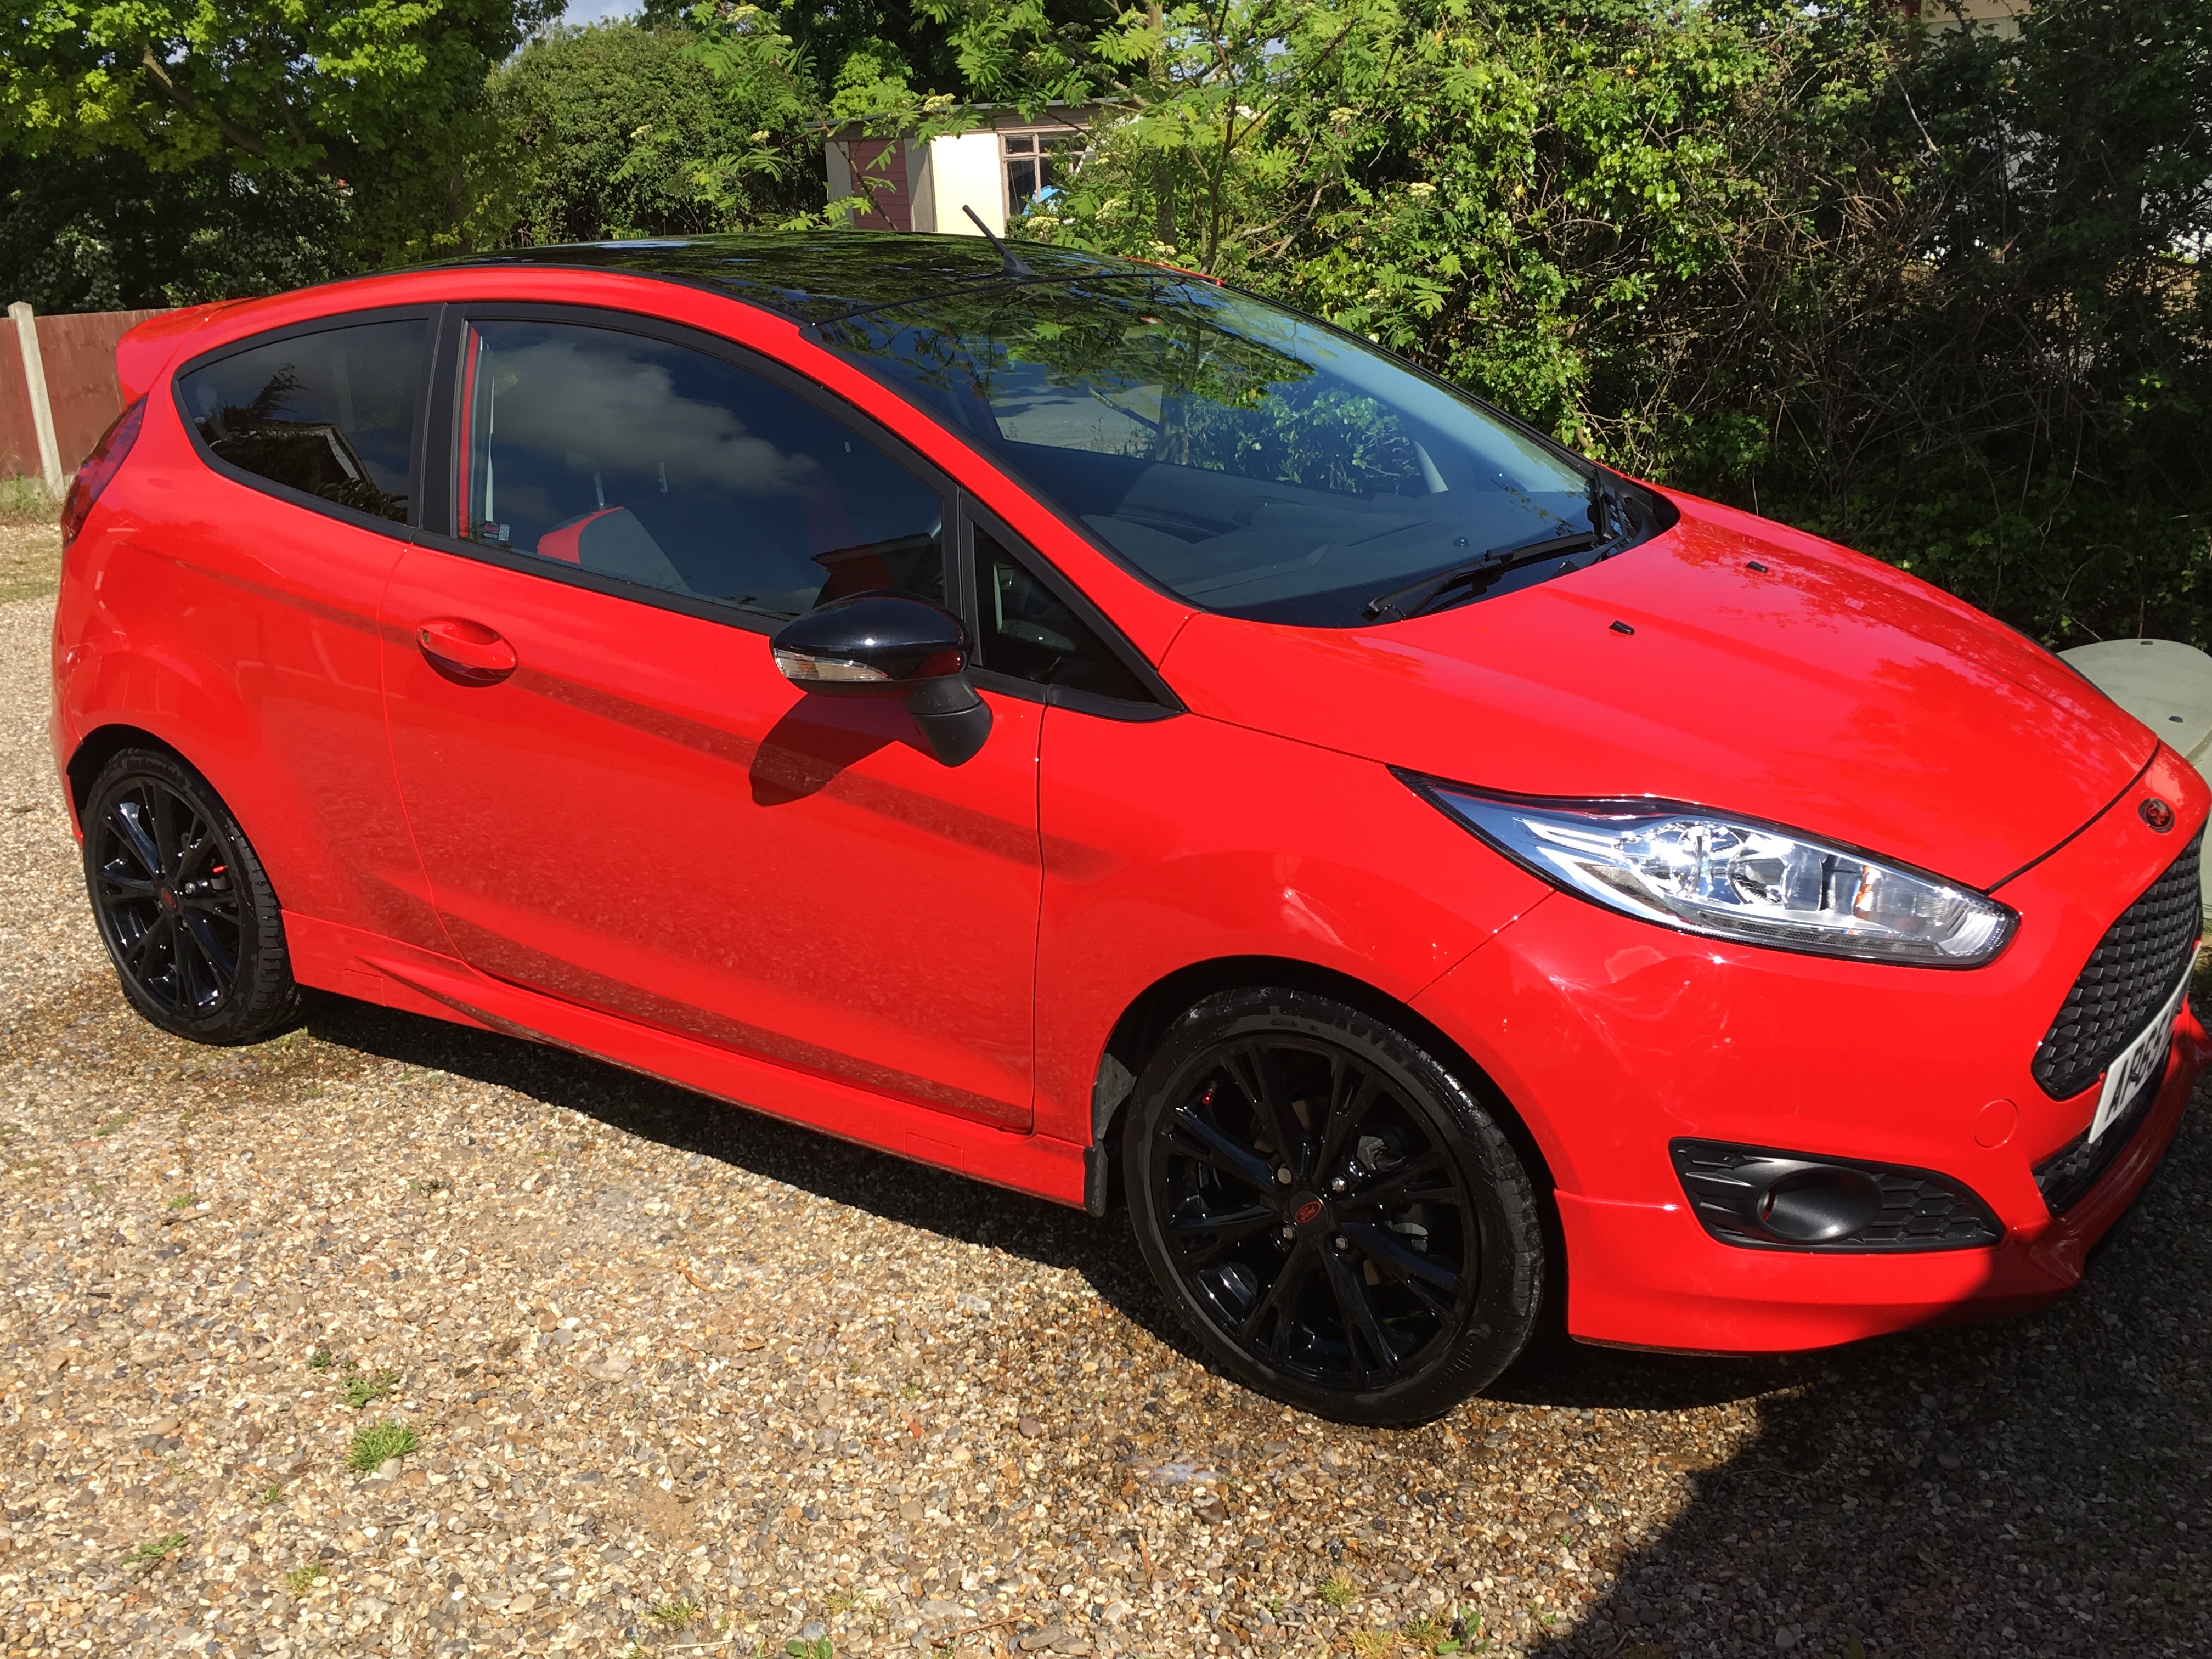 My Fiesta 140ps Red Edition Modifications - Ford and Build Threads - Ford Owners - Ford Forums